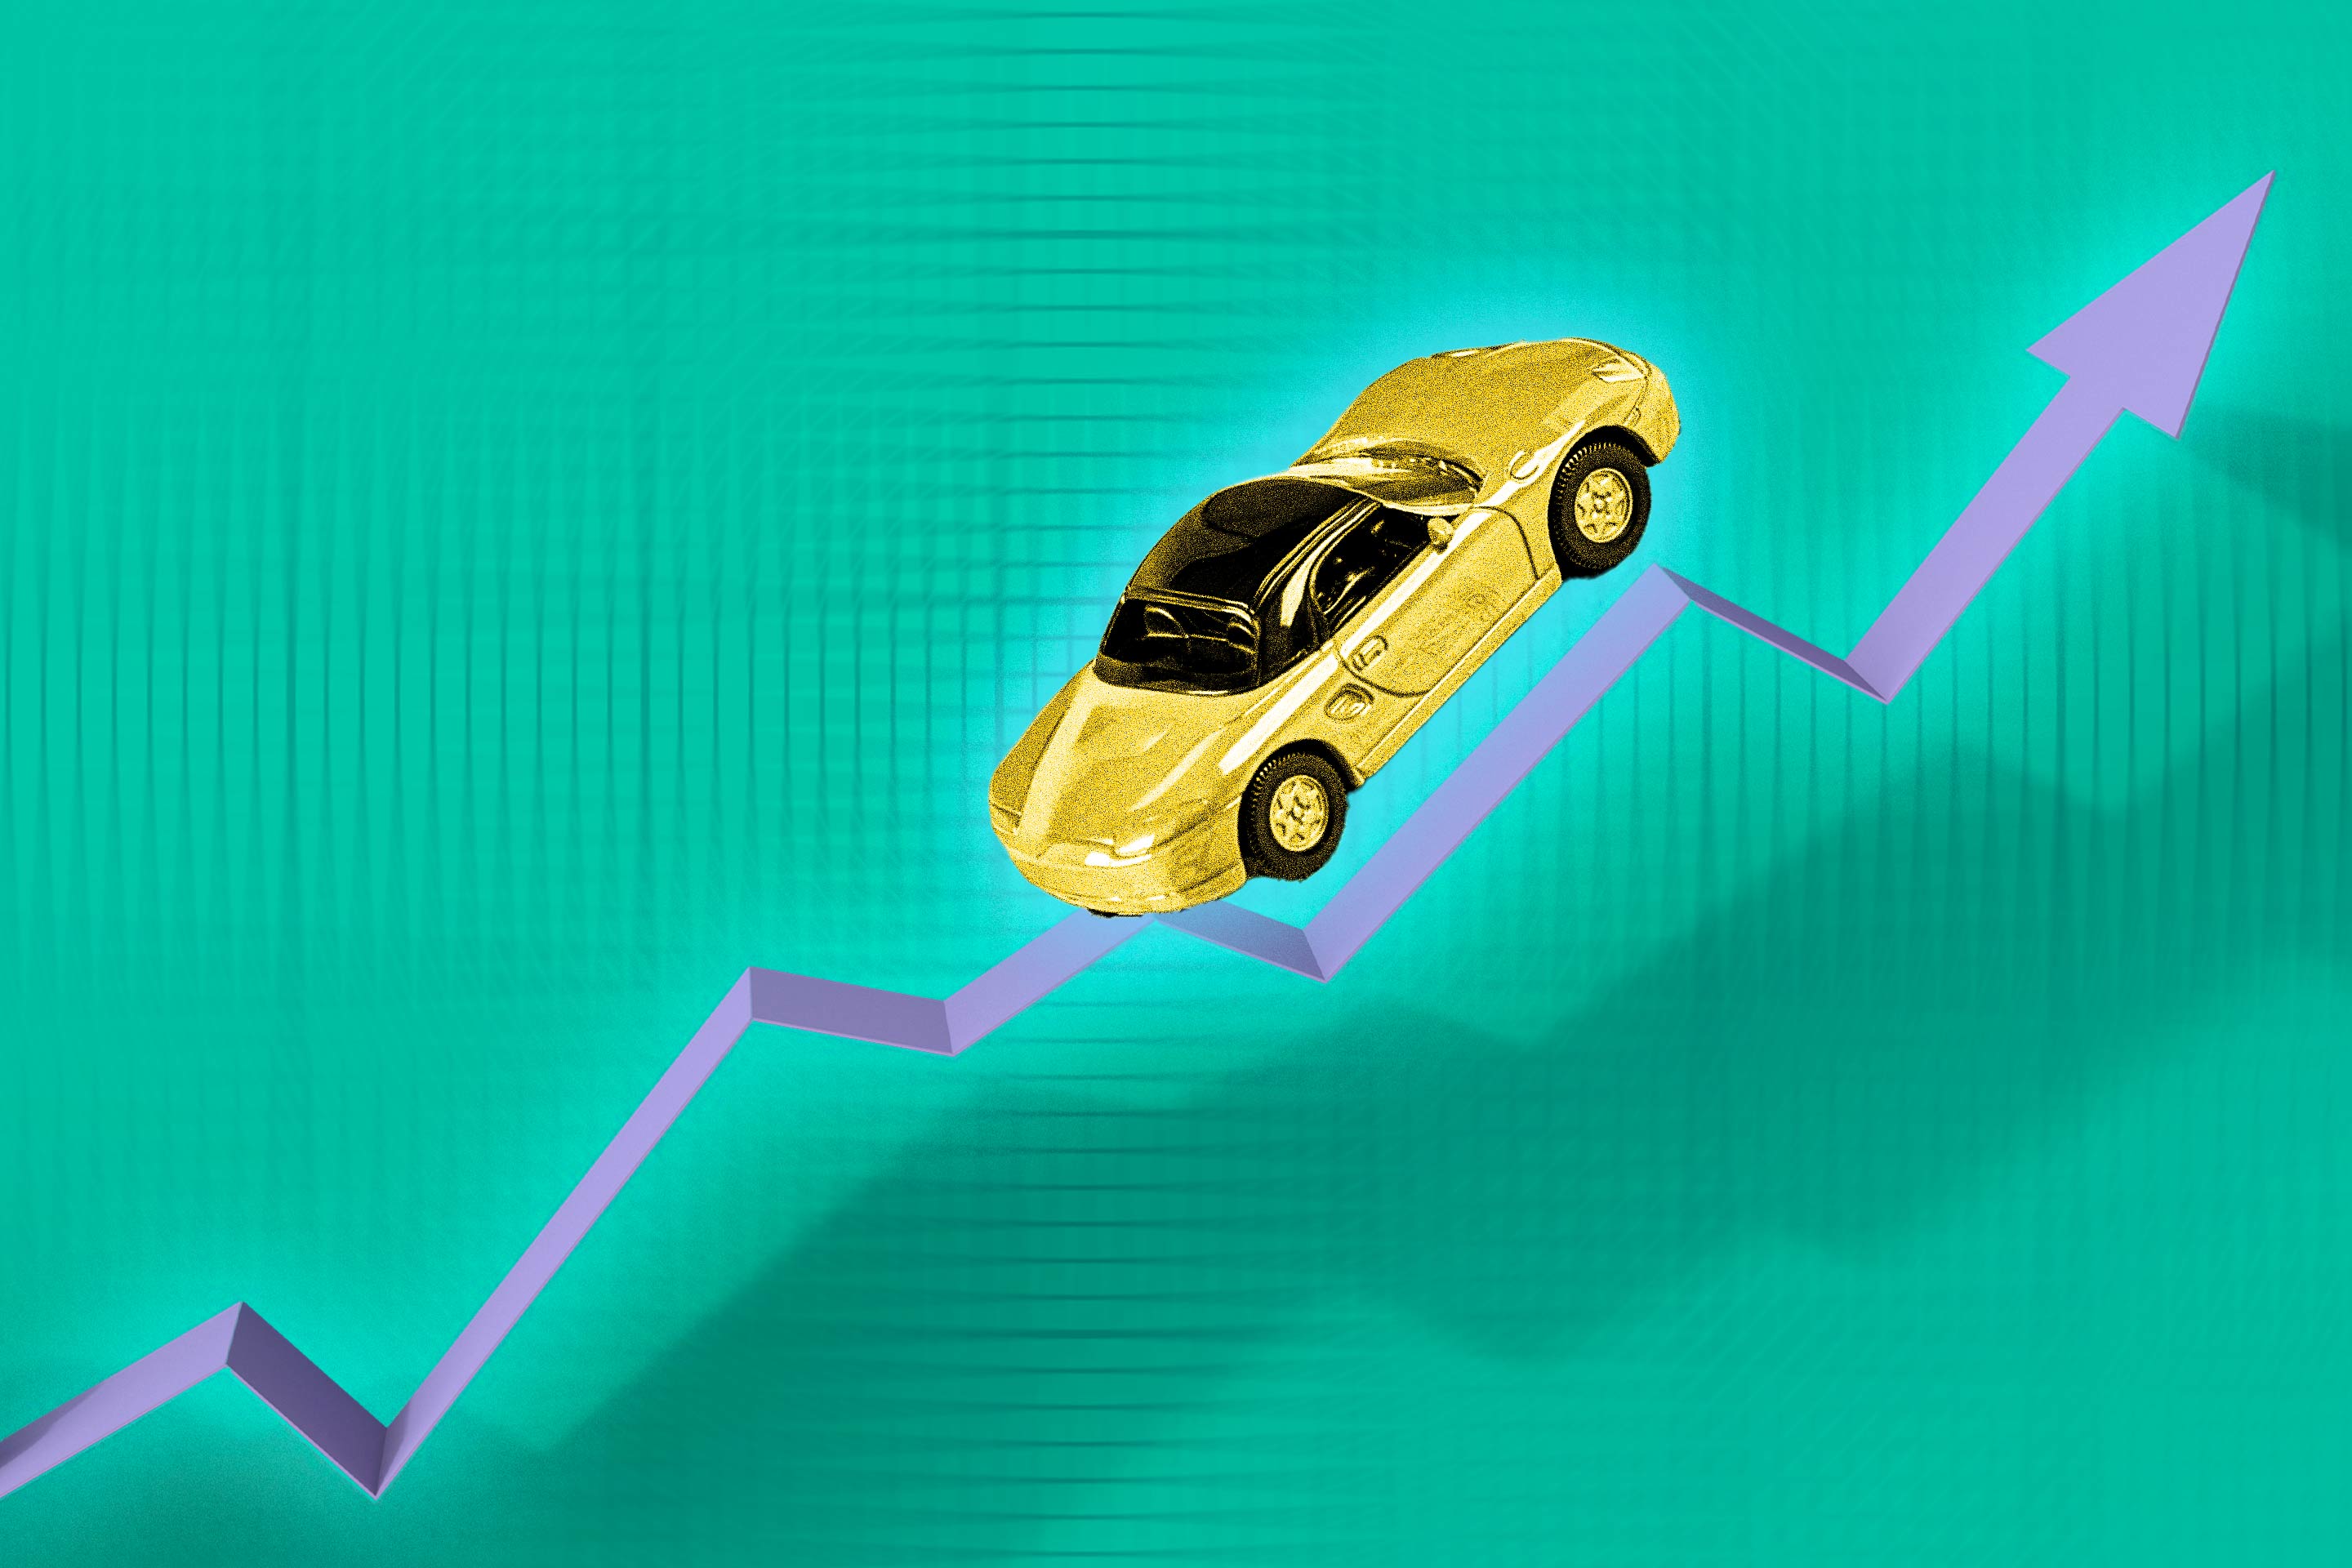 3 Reasons Why New Car Costs Are Higher, Even Though Prices Are Dropping